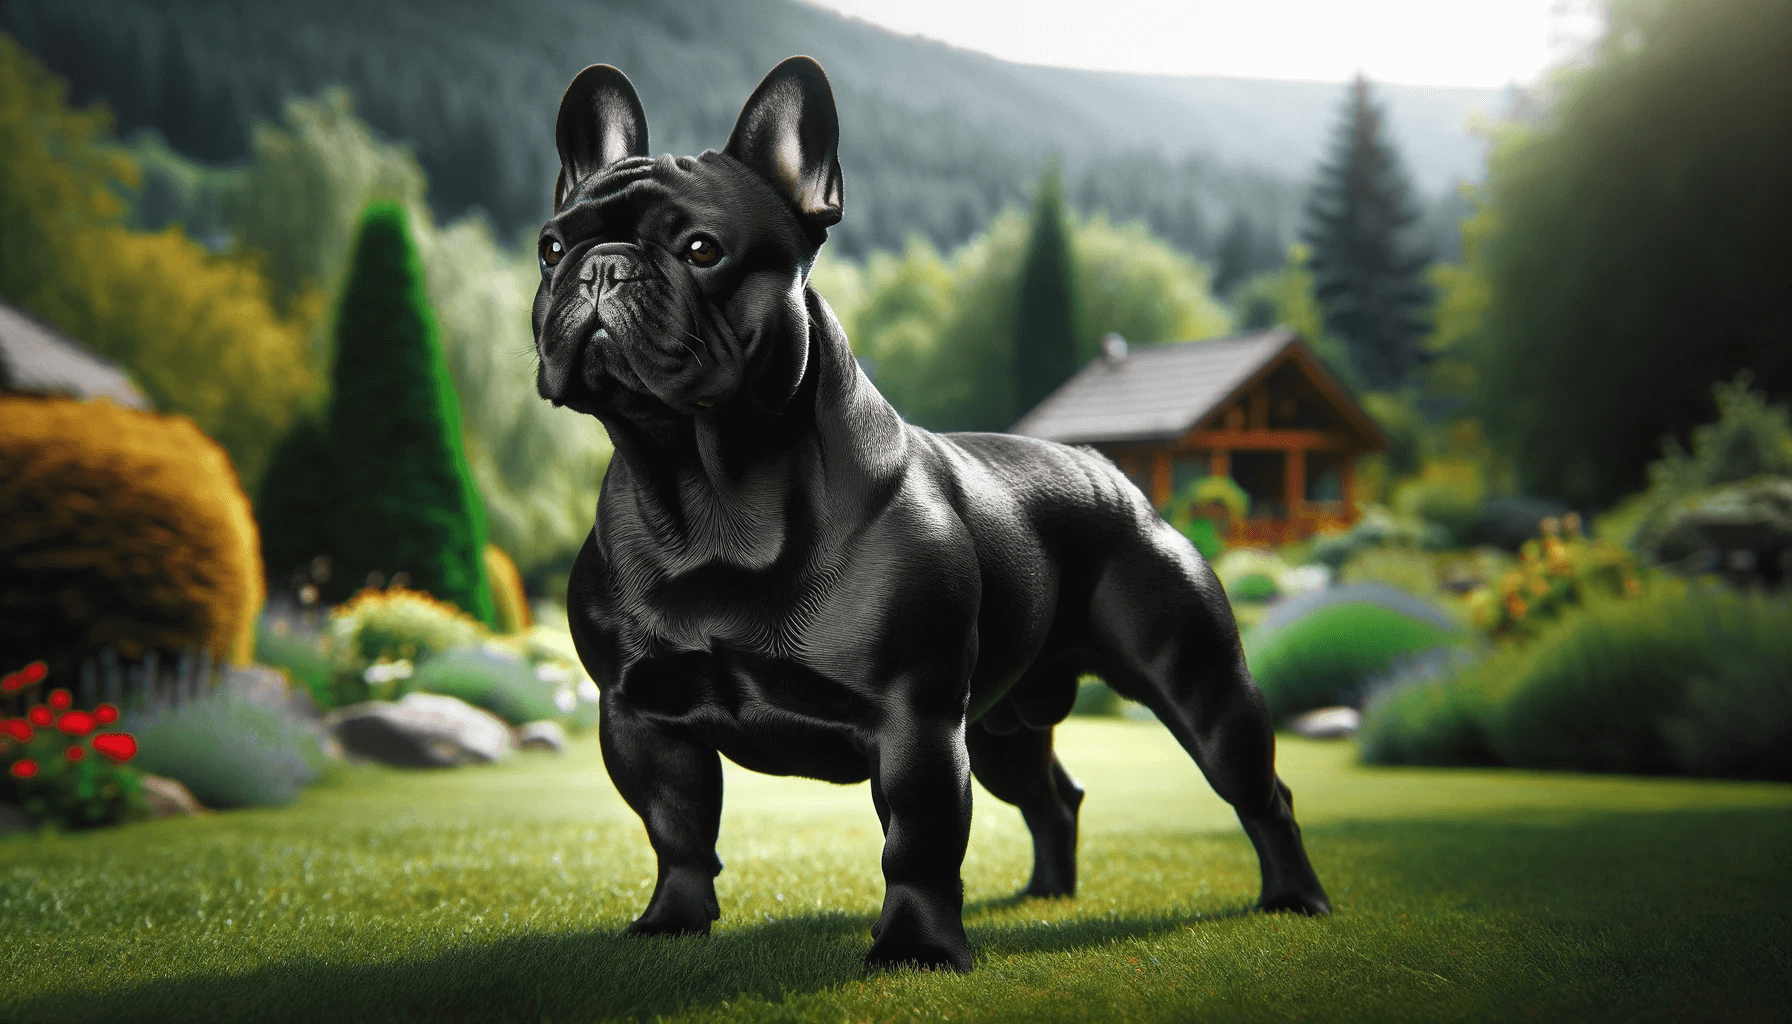 Black French Bulldog in Picturesque Outdoor Setting